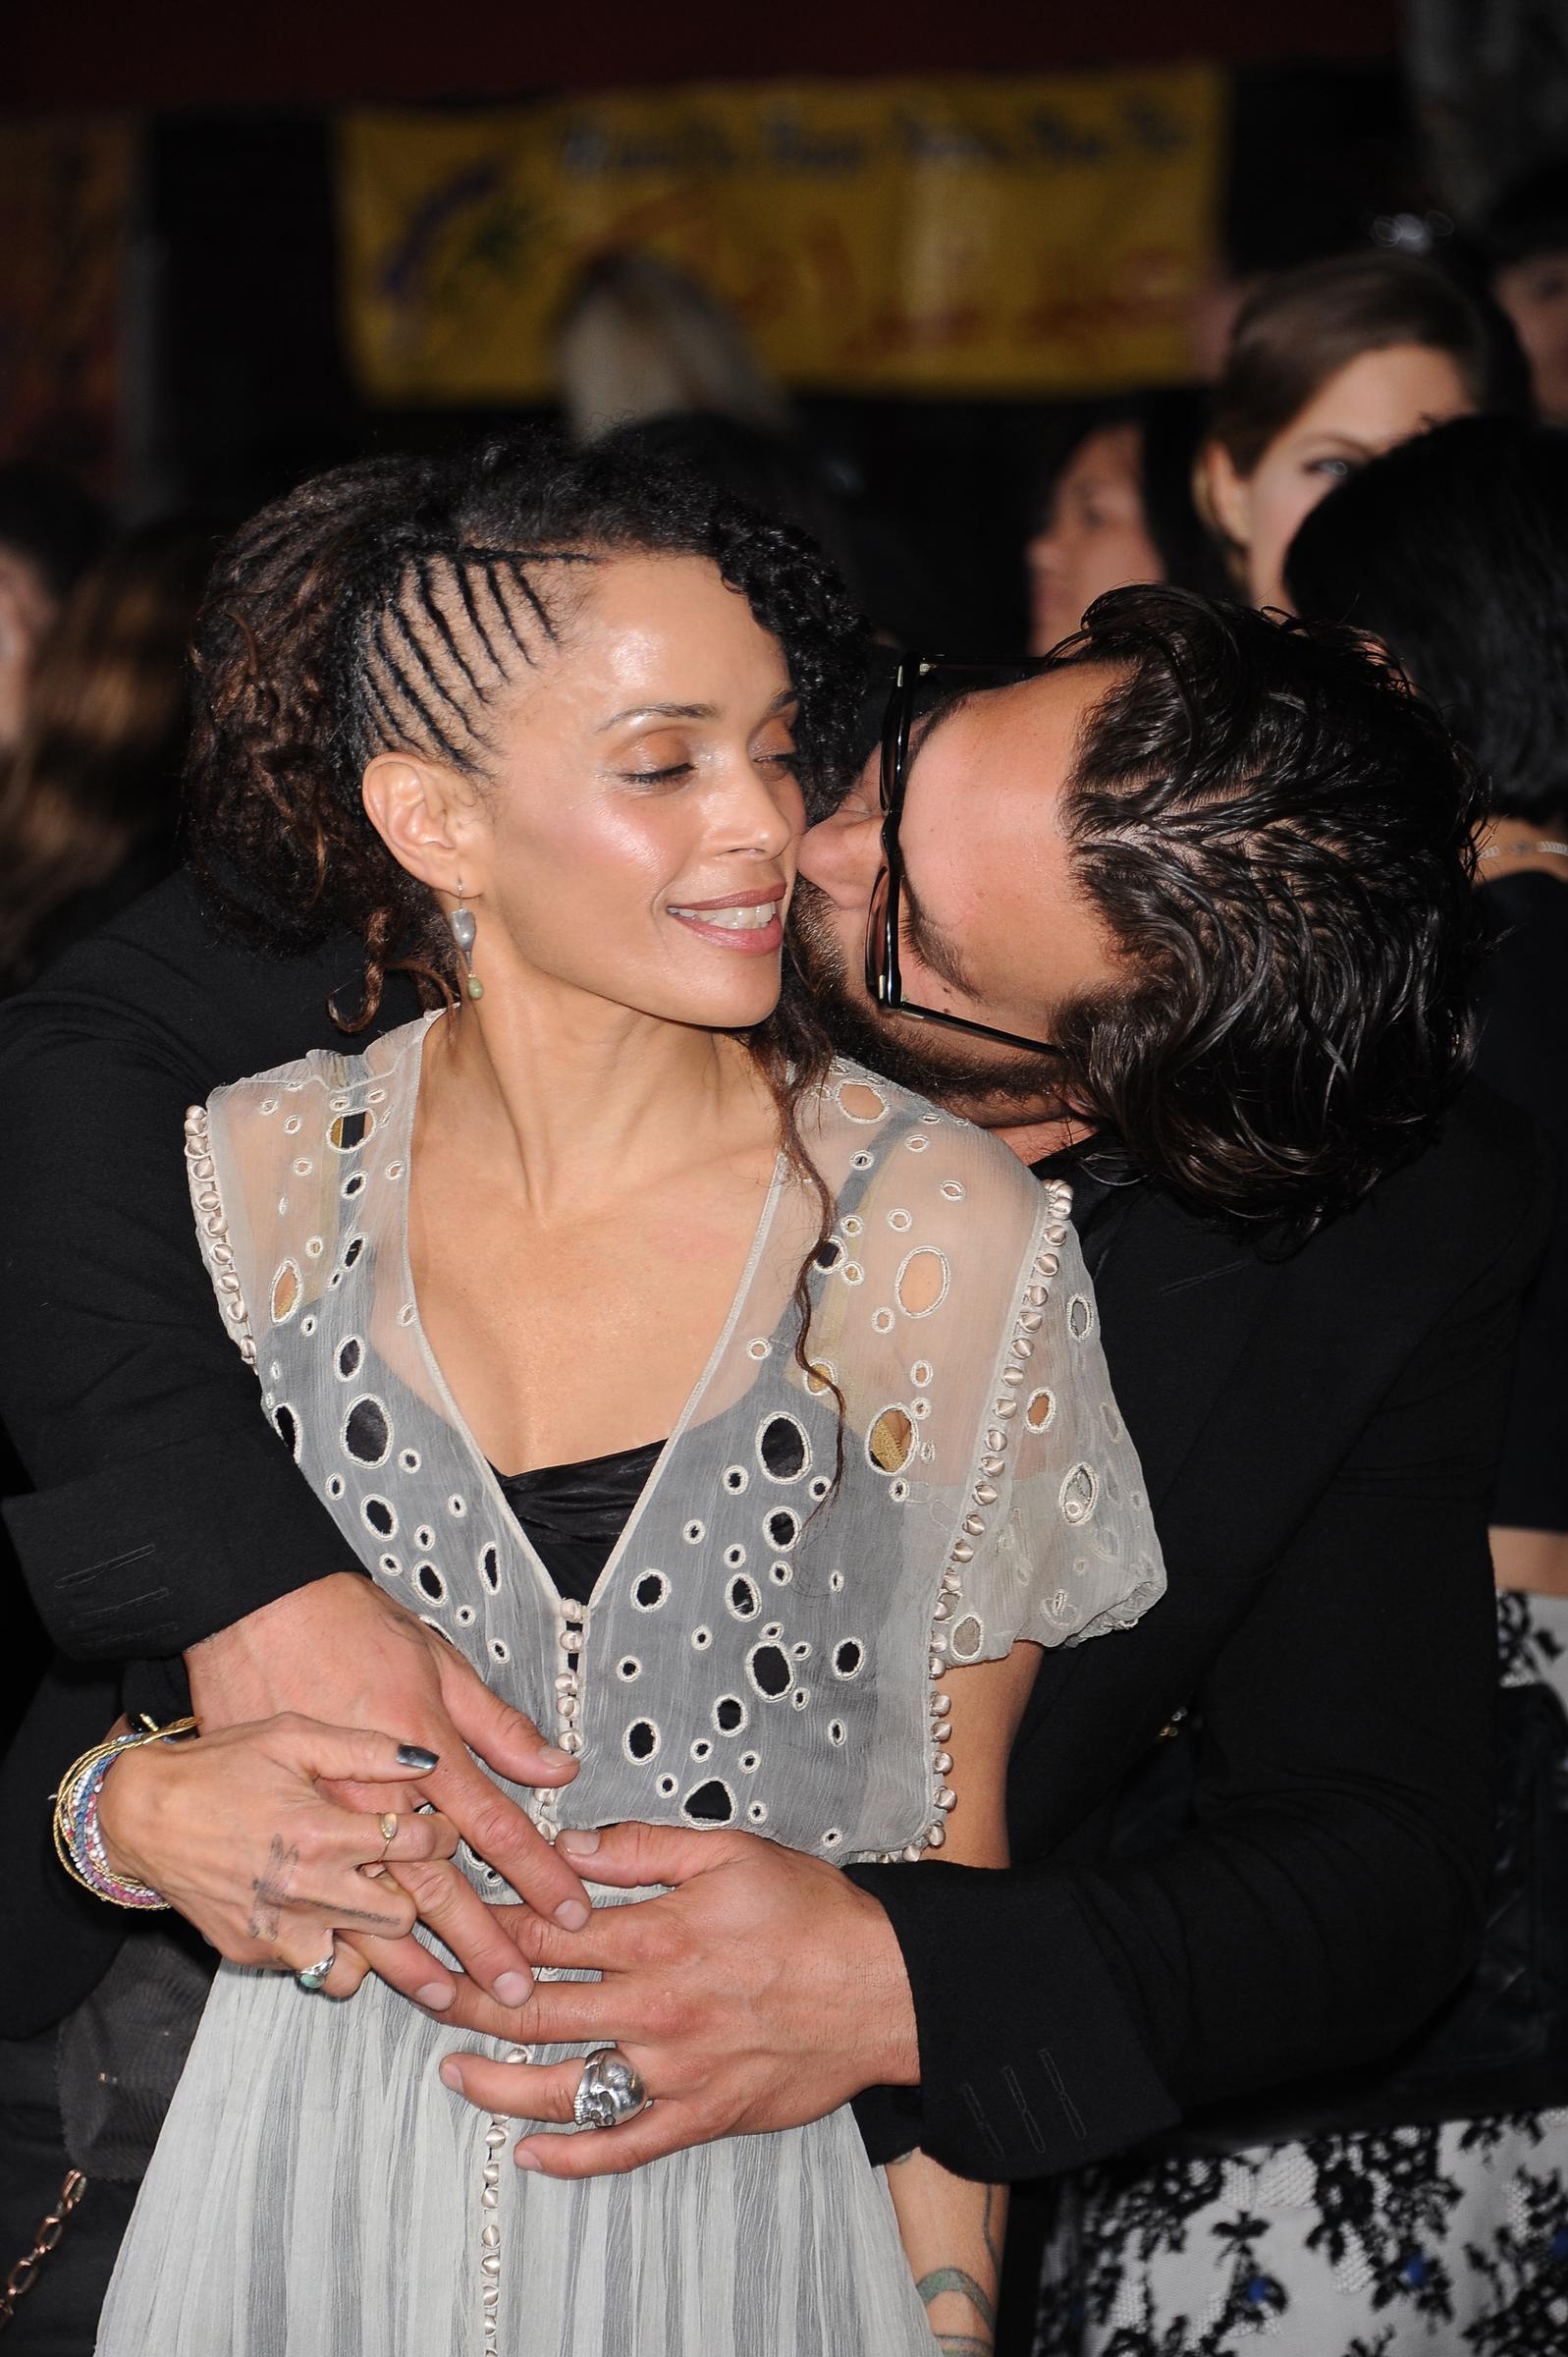 Lisa Bonet and Jason Momoa attend the premiere of "Divergent" in Westwood, California | Source: Getty Images